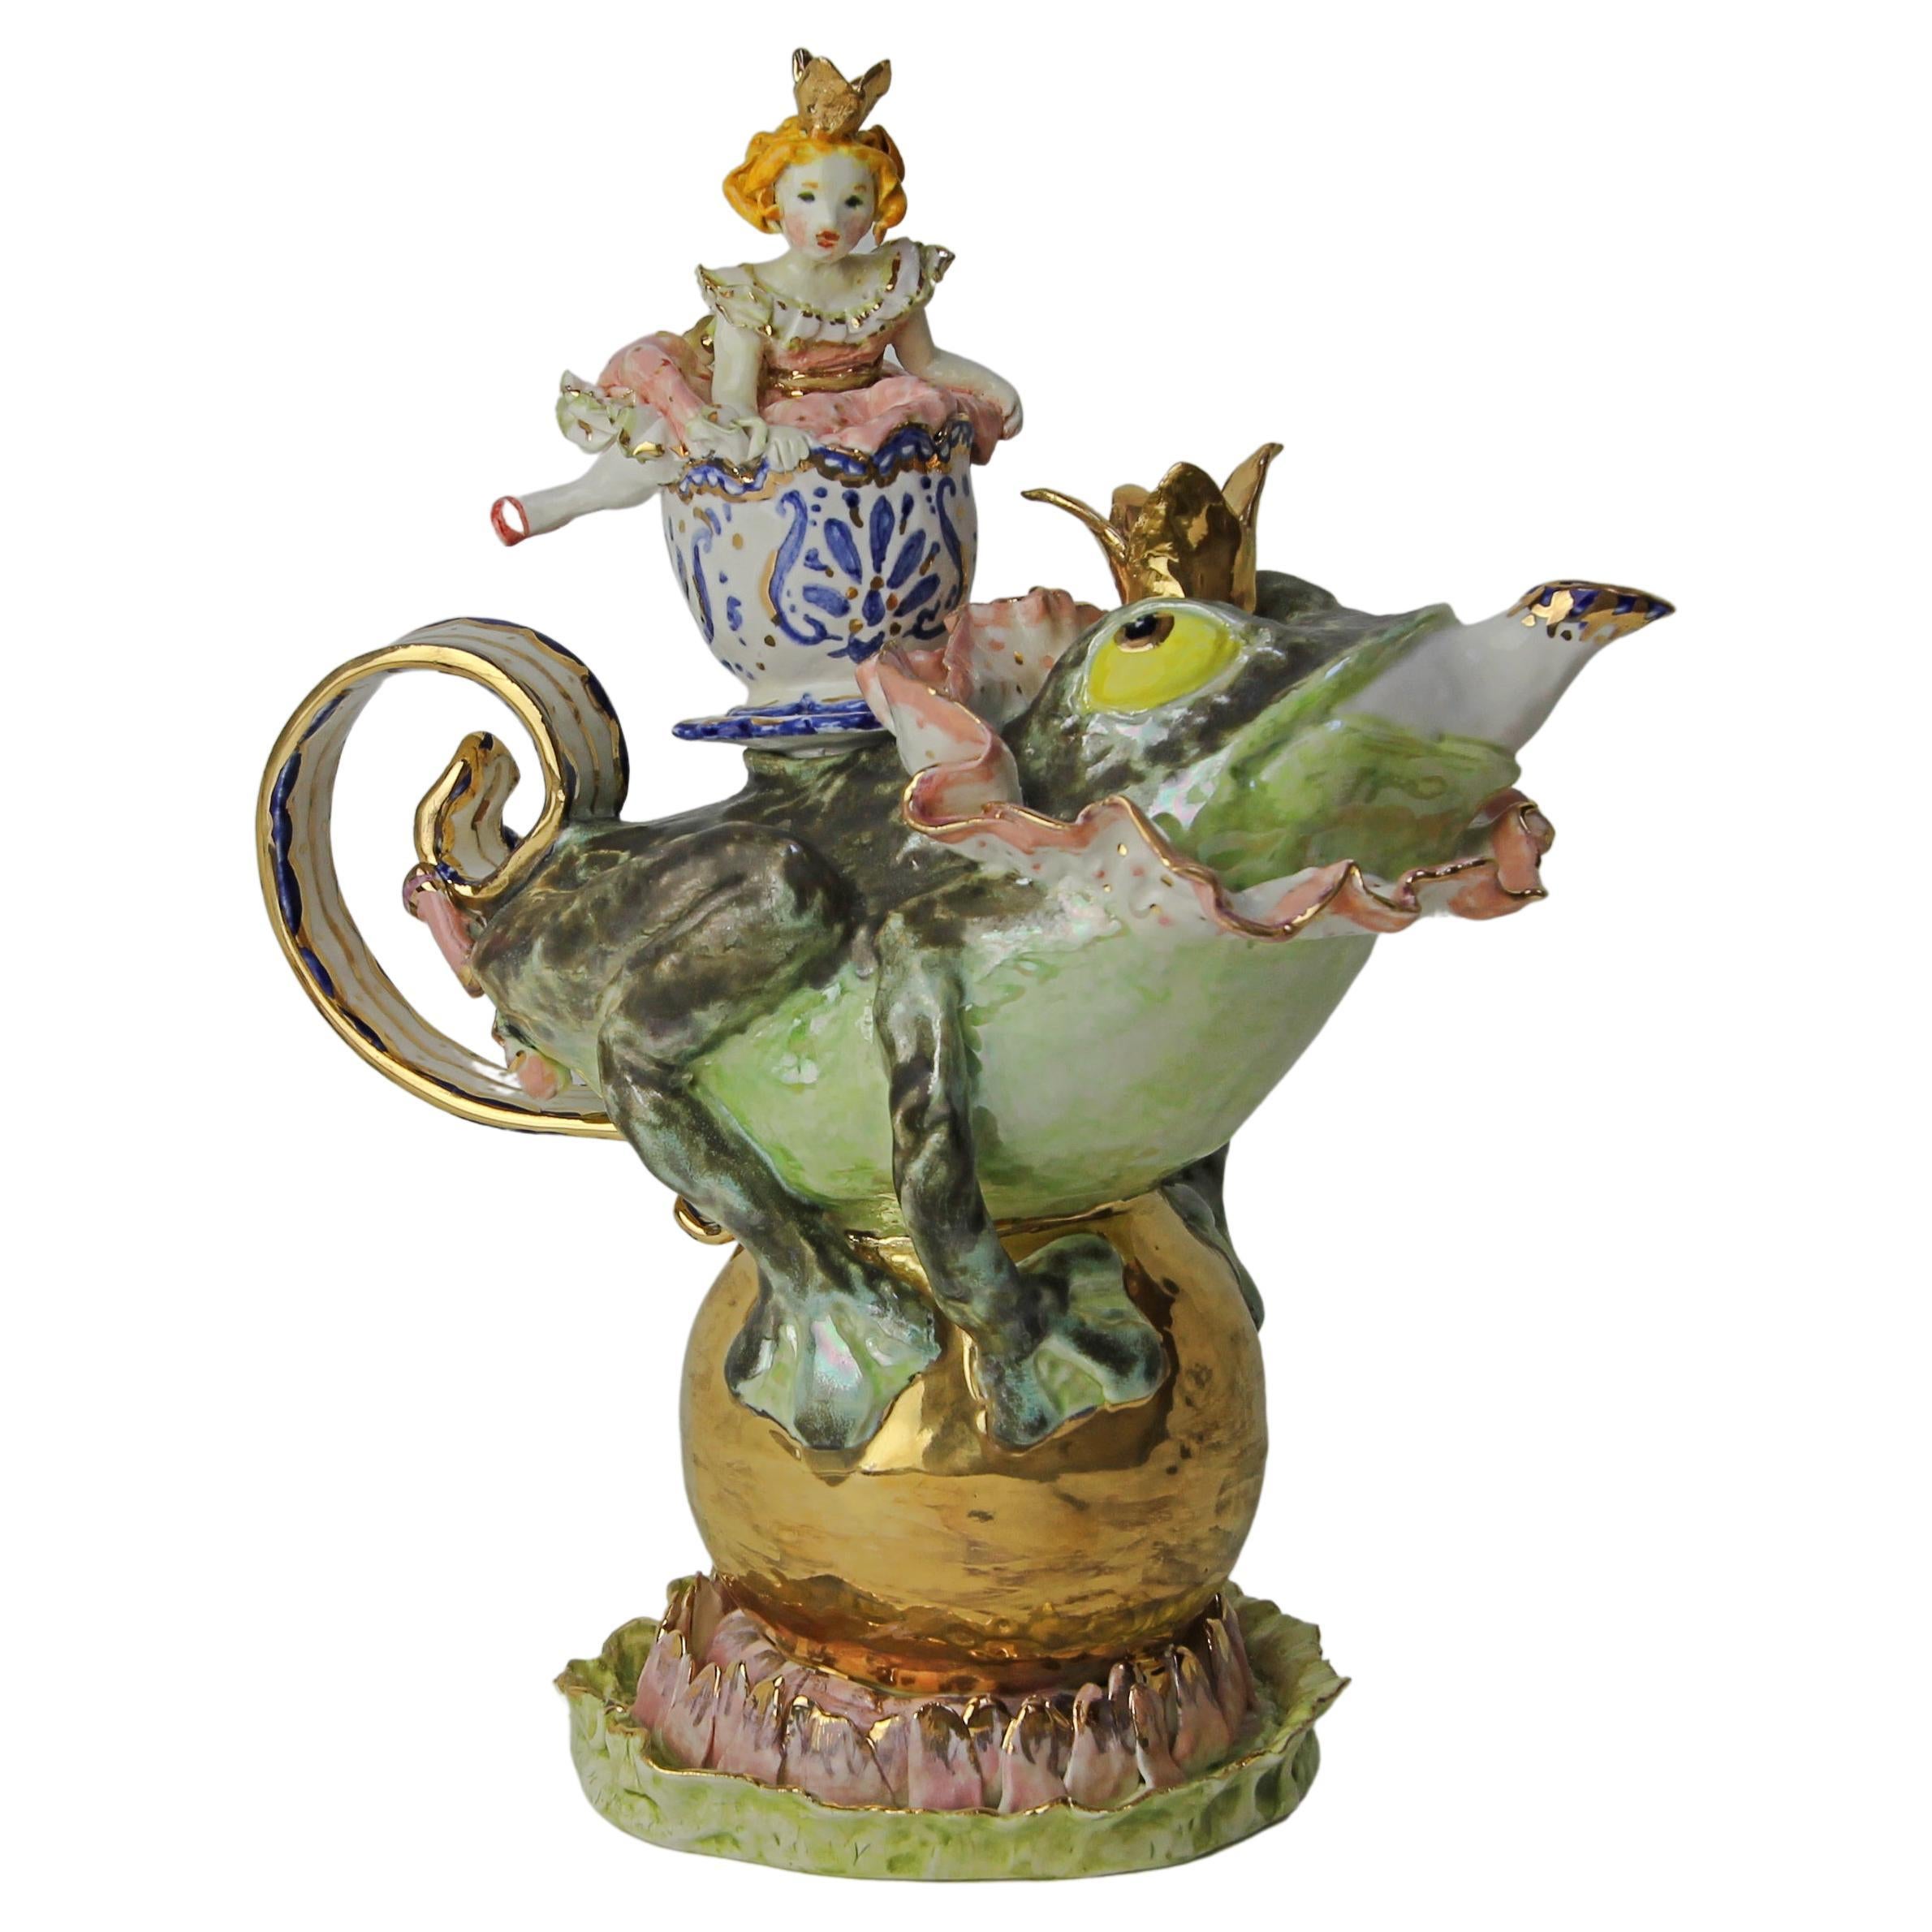 Prince Charming Teapot, Handmade in Italy, Luxury Handcrafted Design 2021